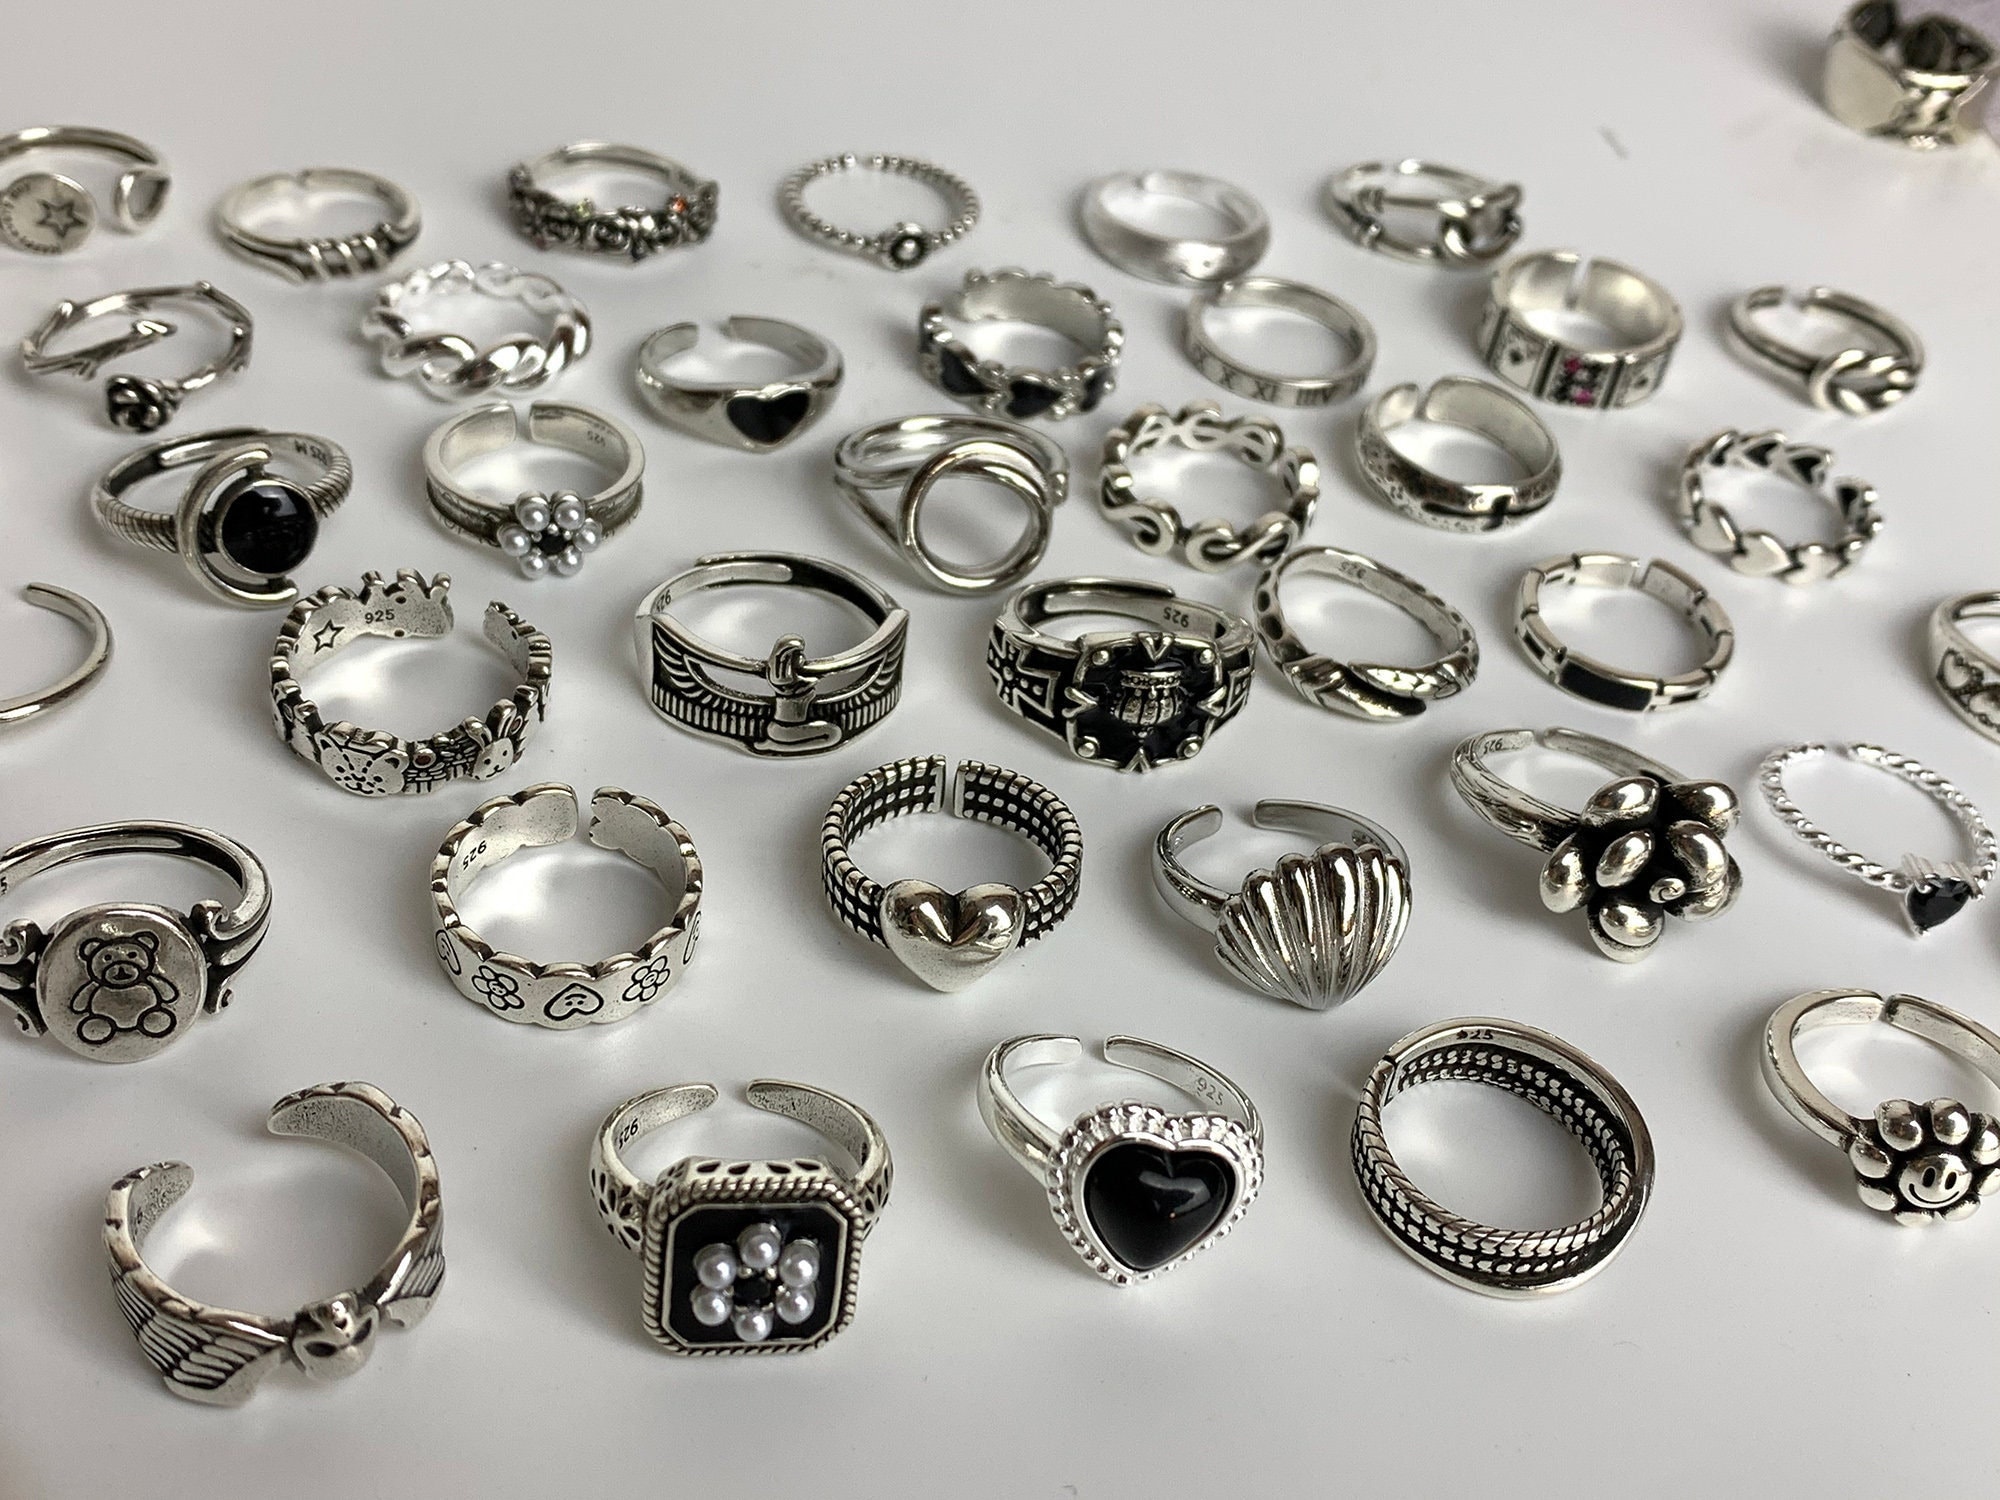  Y2k Accessories for Women,16Pack Silver Metal Ring Set